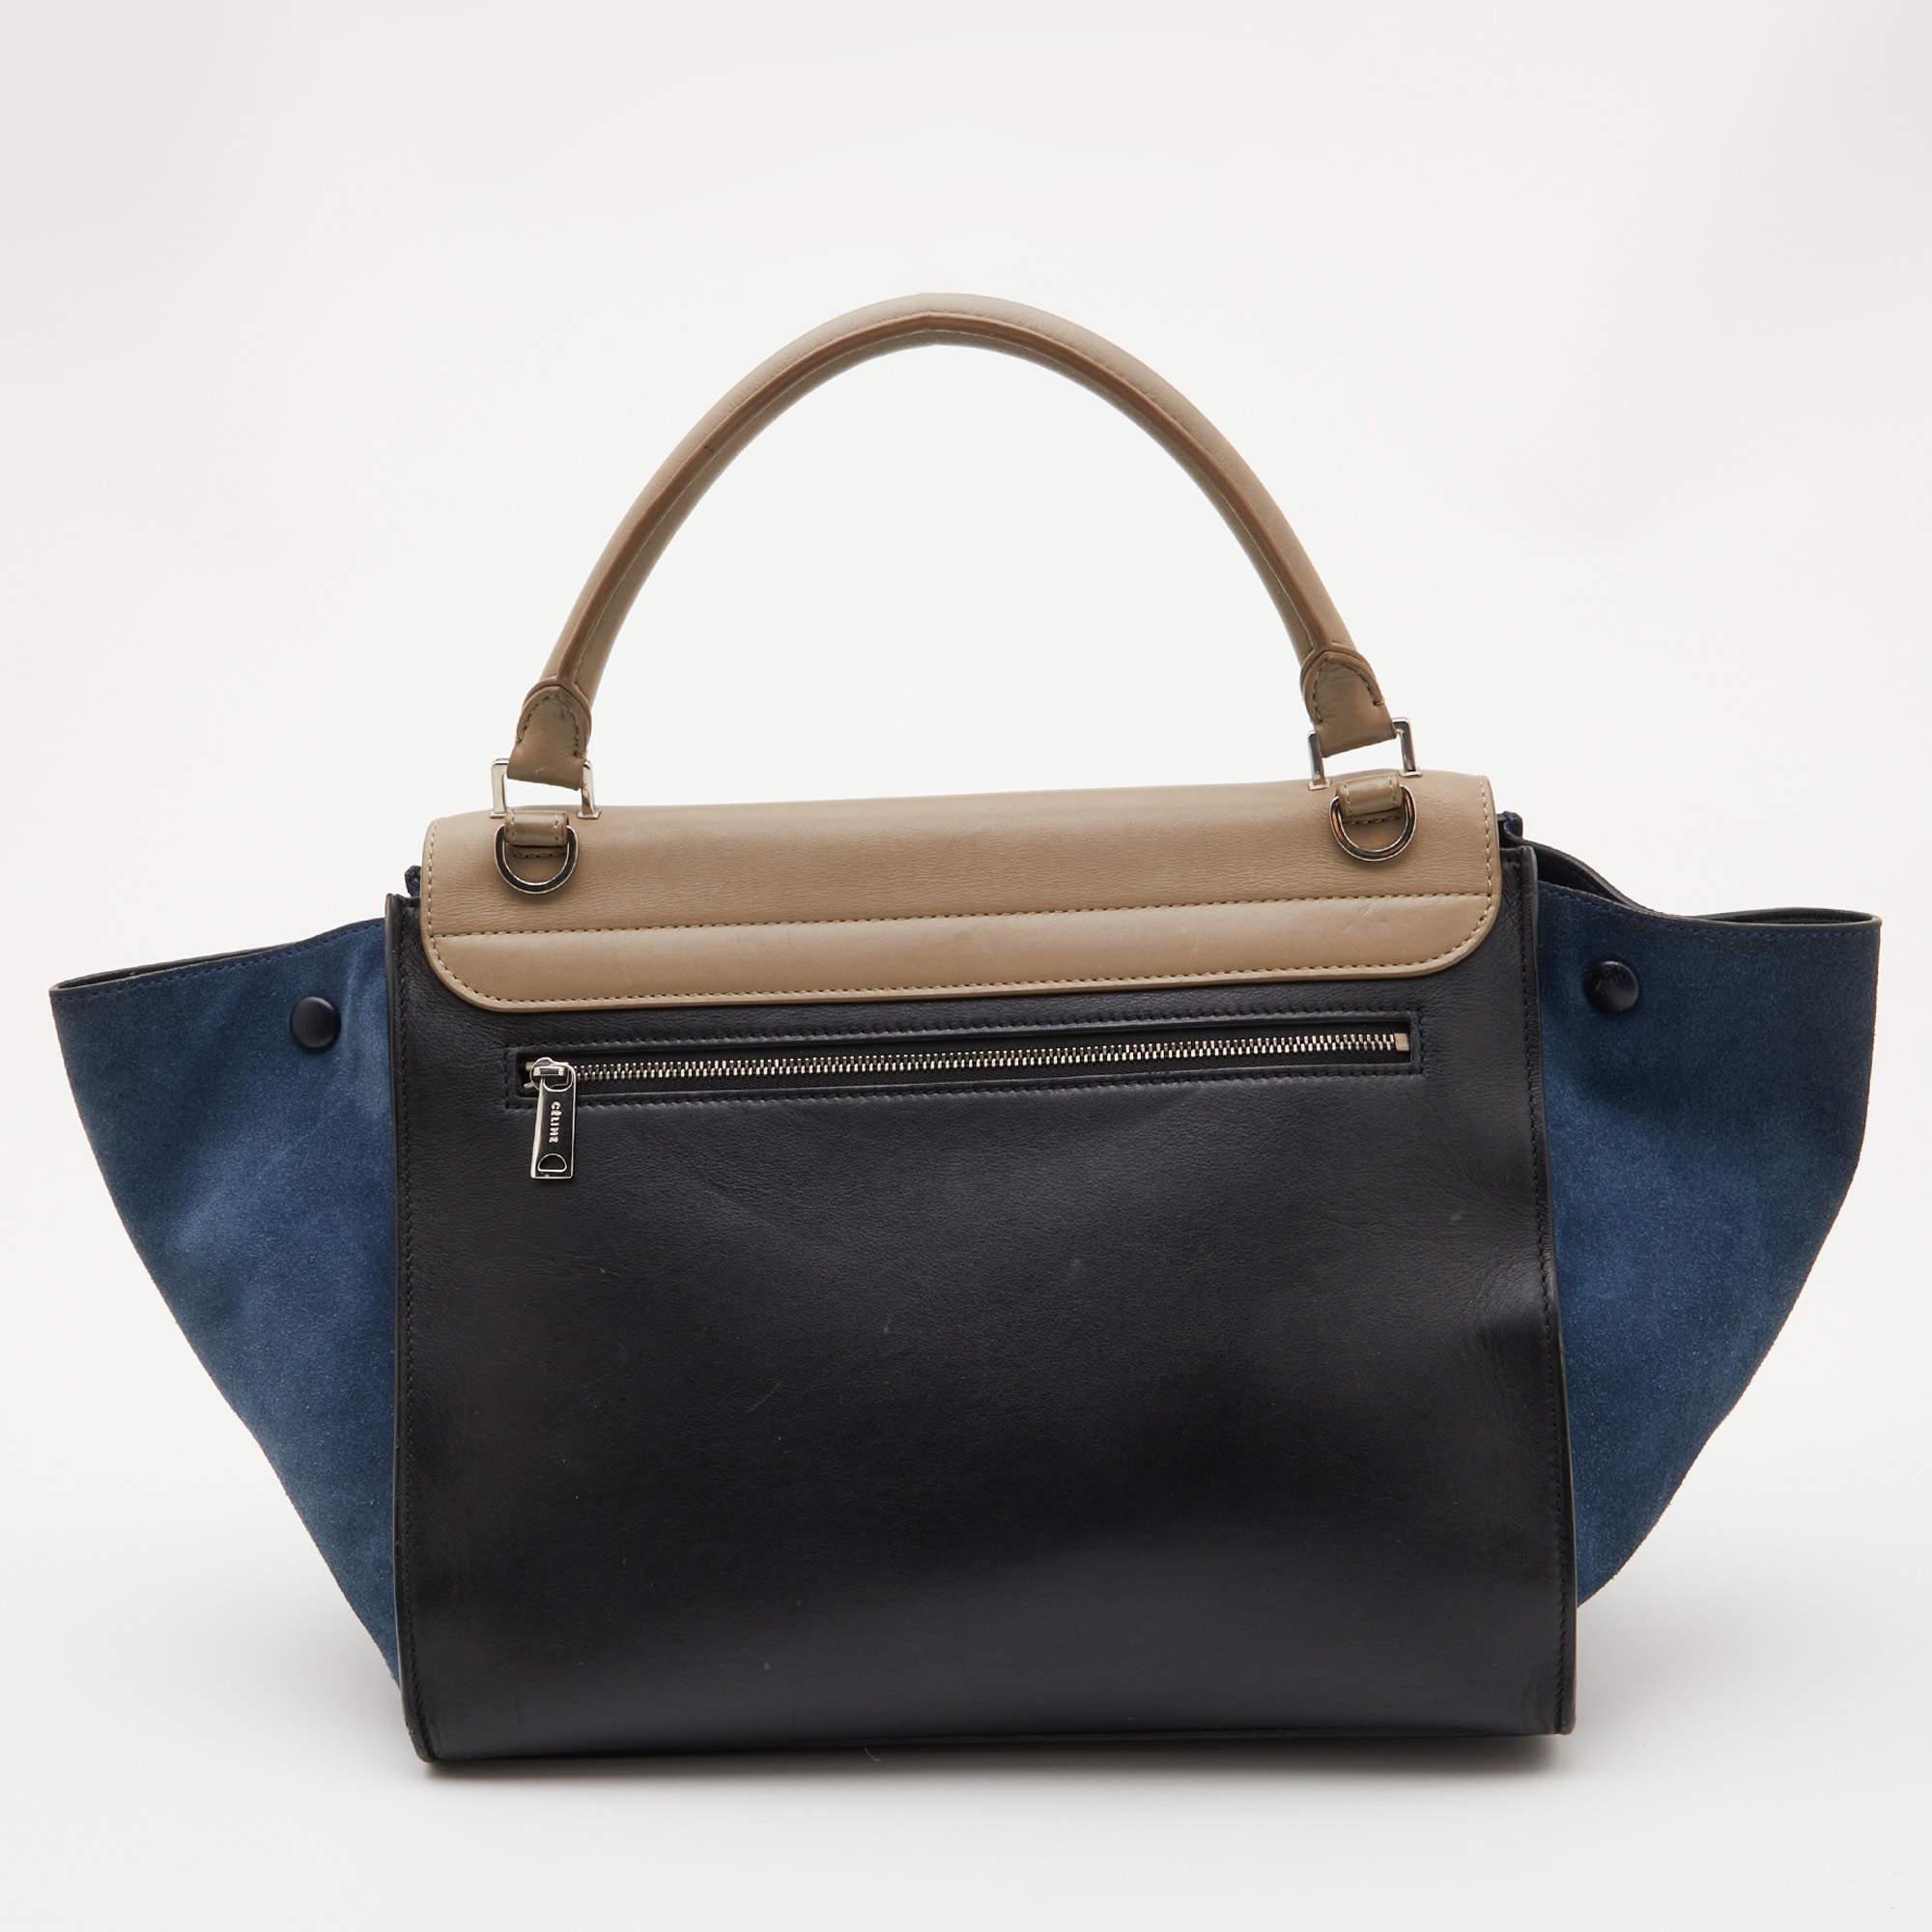 Featuring a simple yet luxurious style, this Celine bag is a thoughtful purchase with its classy aesthetics. Crafted from leather and suede, it is characterized by flappy wings, silver-tone hardware, and a back zipper pocket. The front flap of this